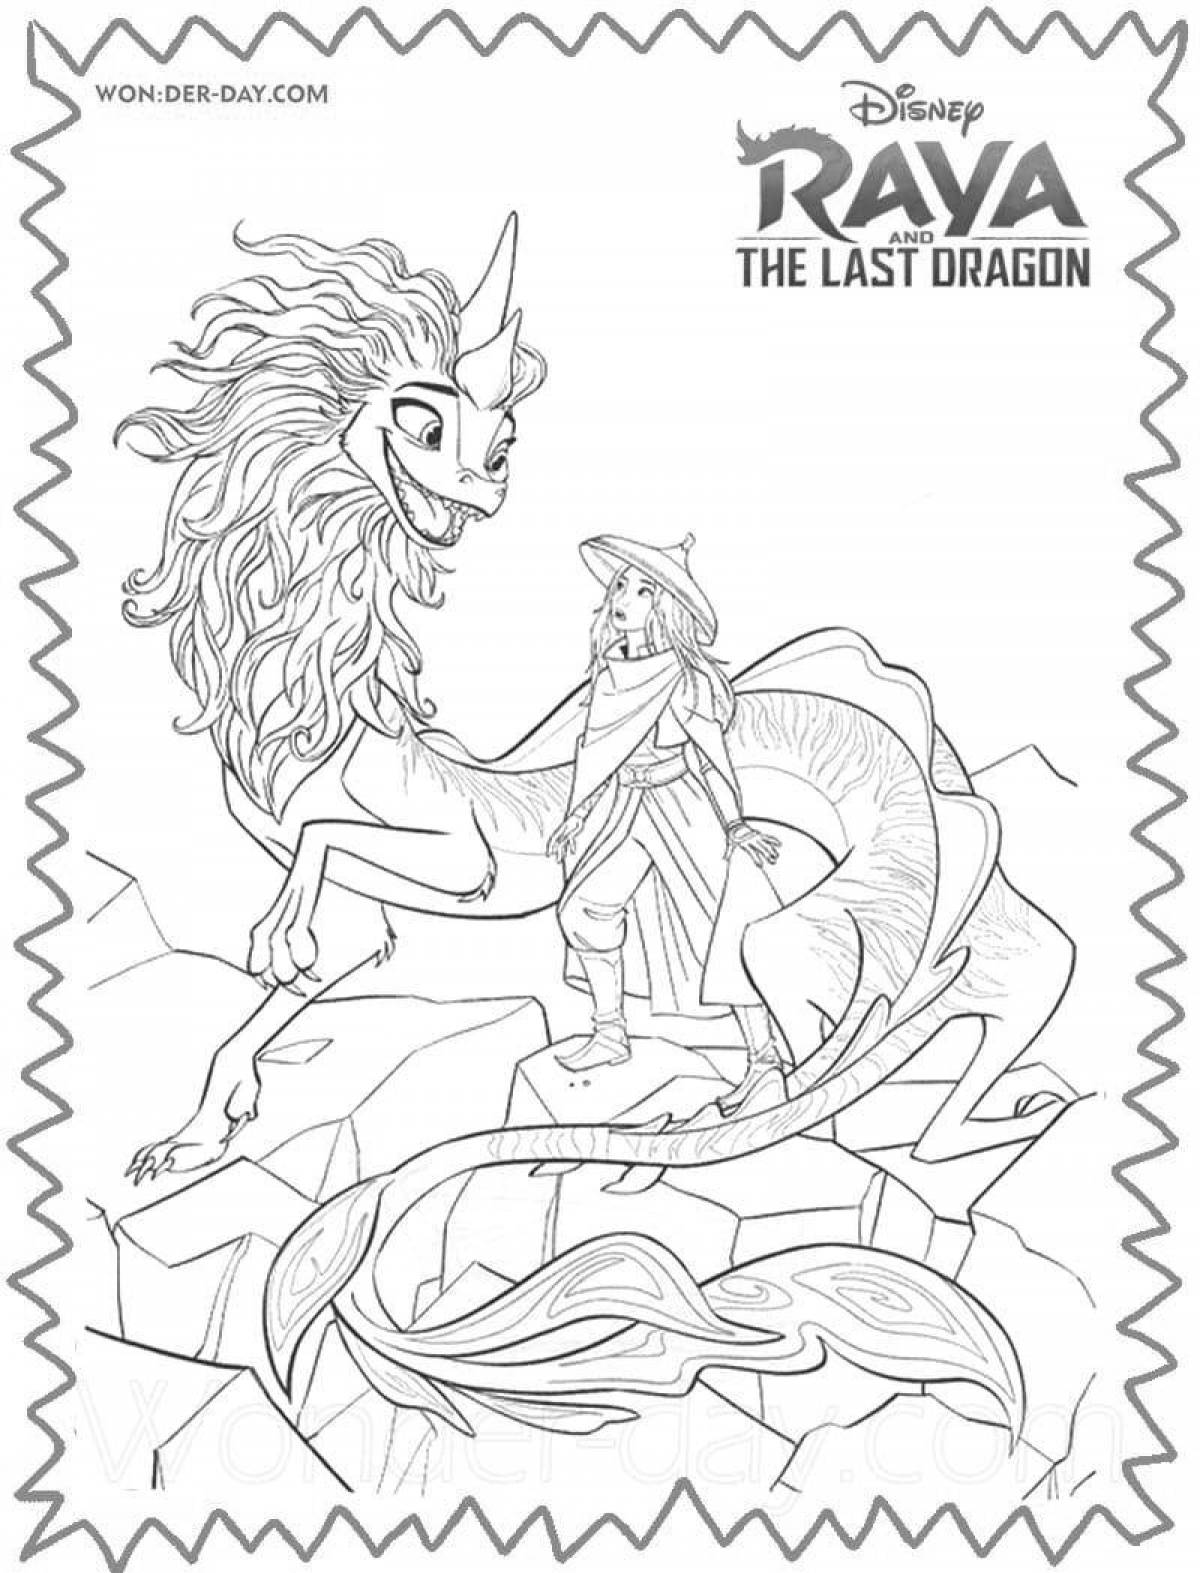 Glorious Paradise and the last dragon coloring page